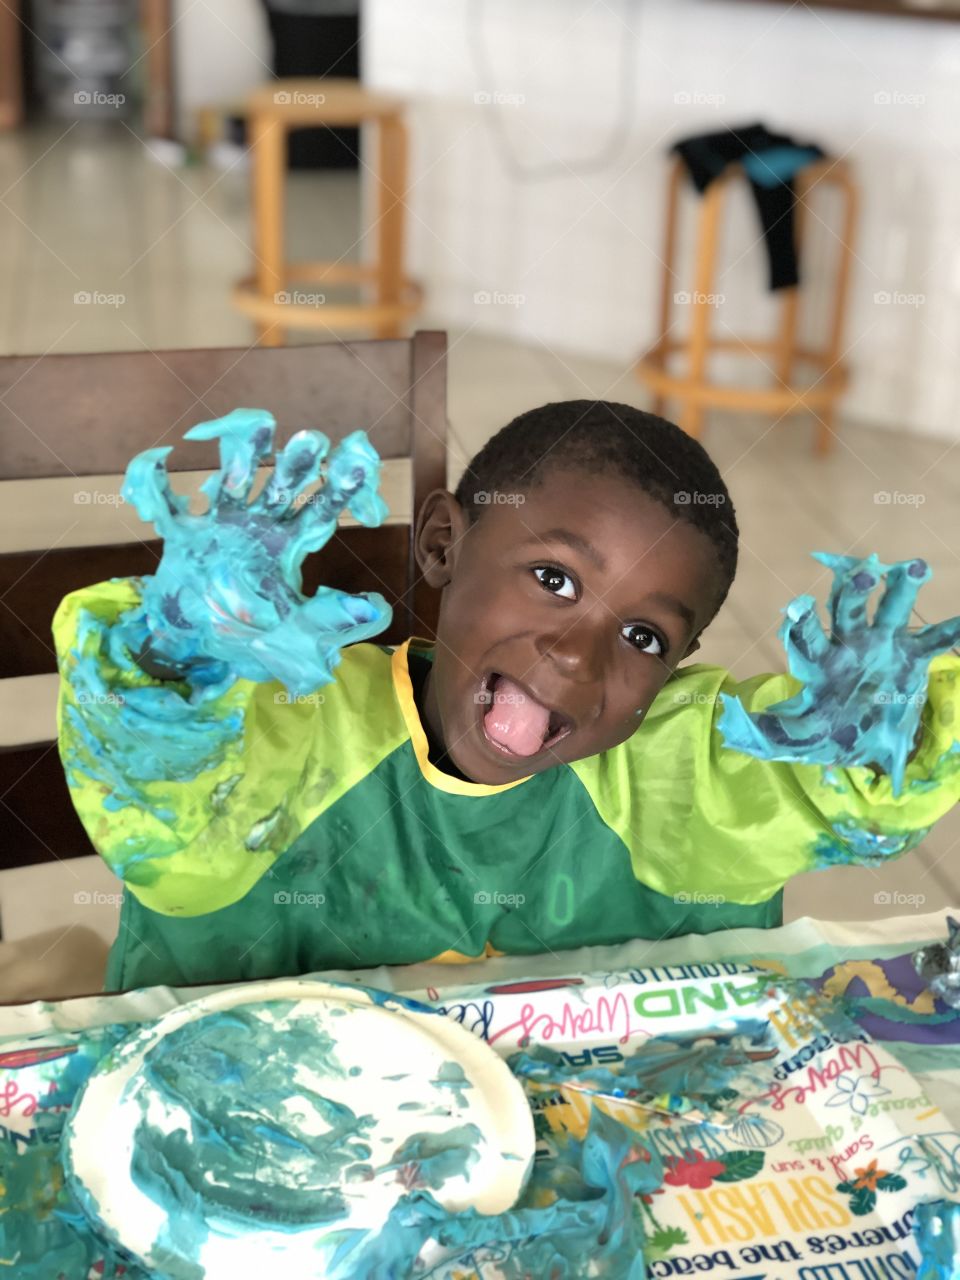 Child with messy hands art project